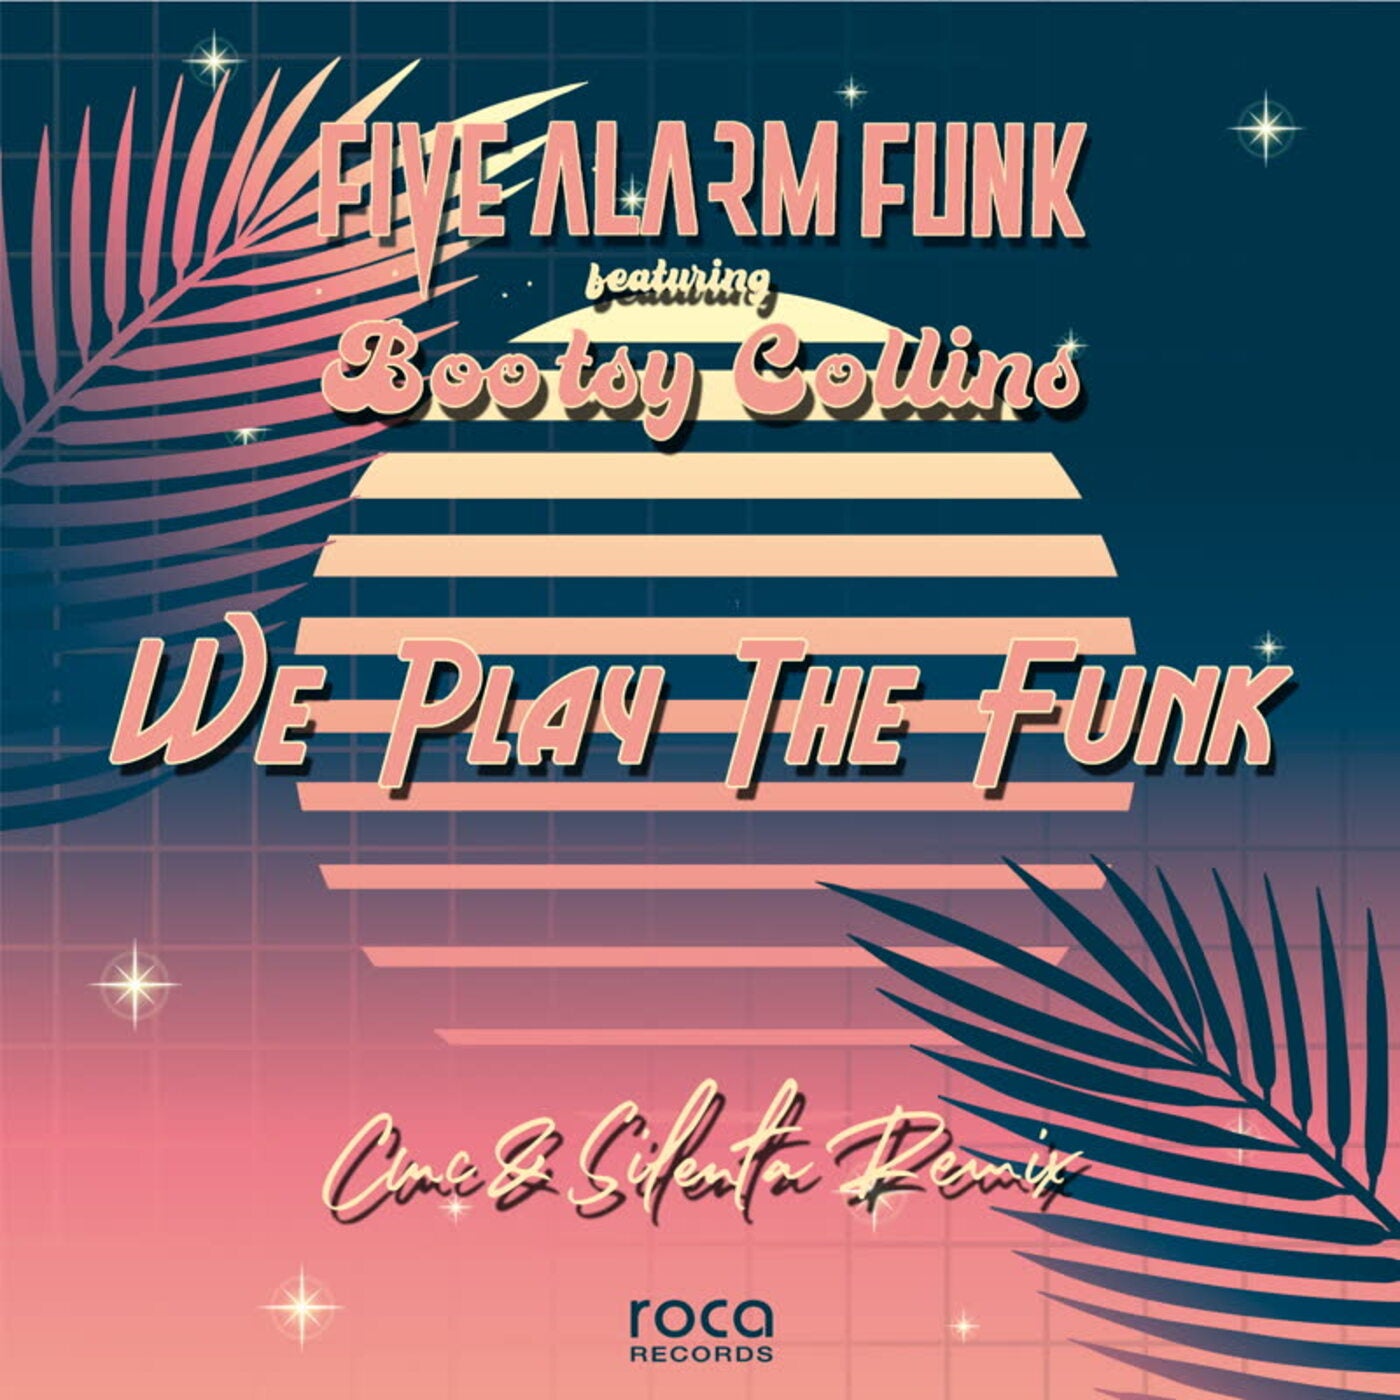 We Play the Funk (CMC & Silenta Remix) [feat. Bootsy Collins]